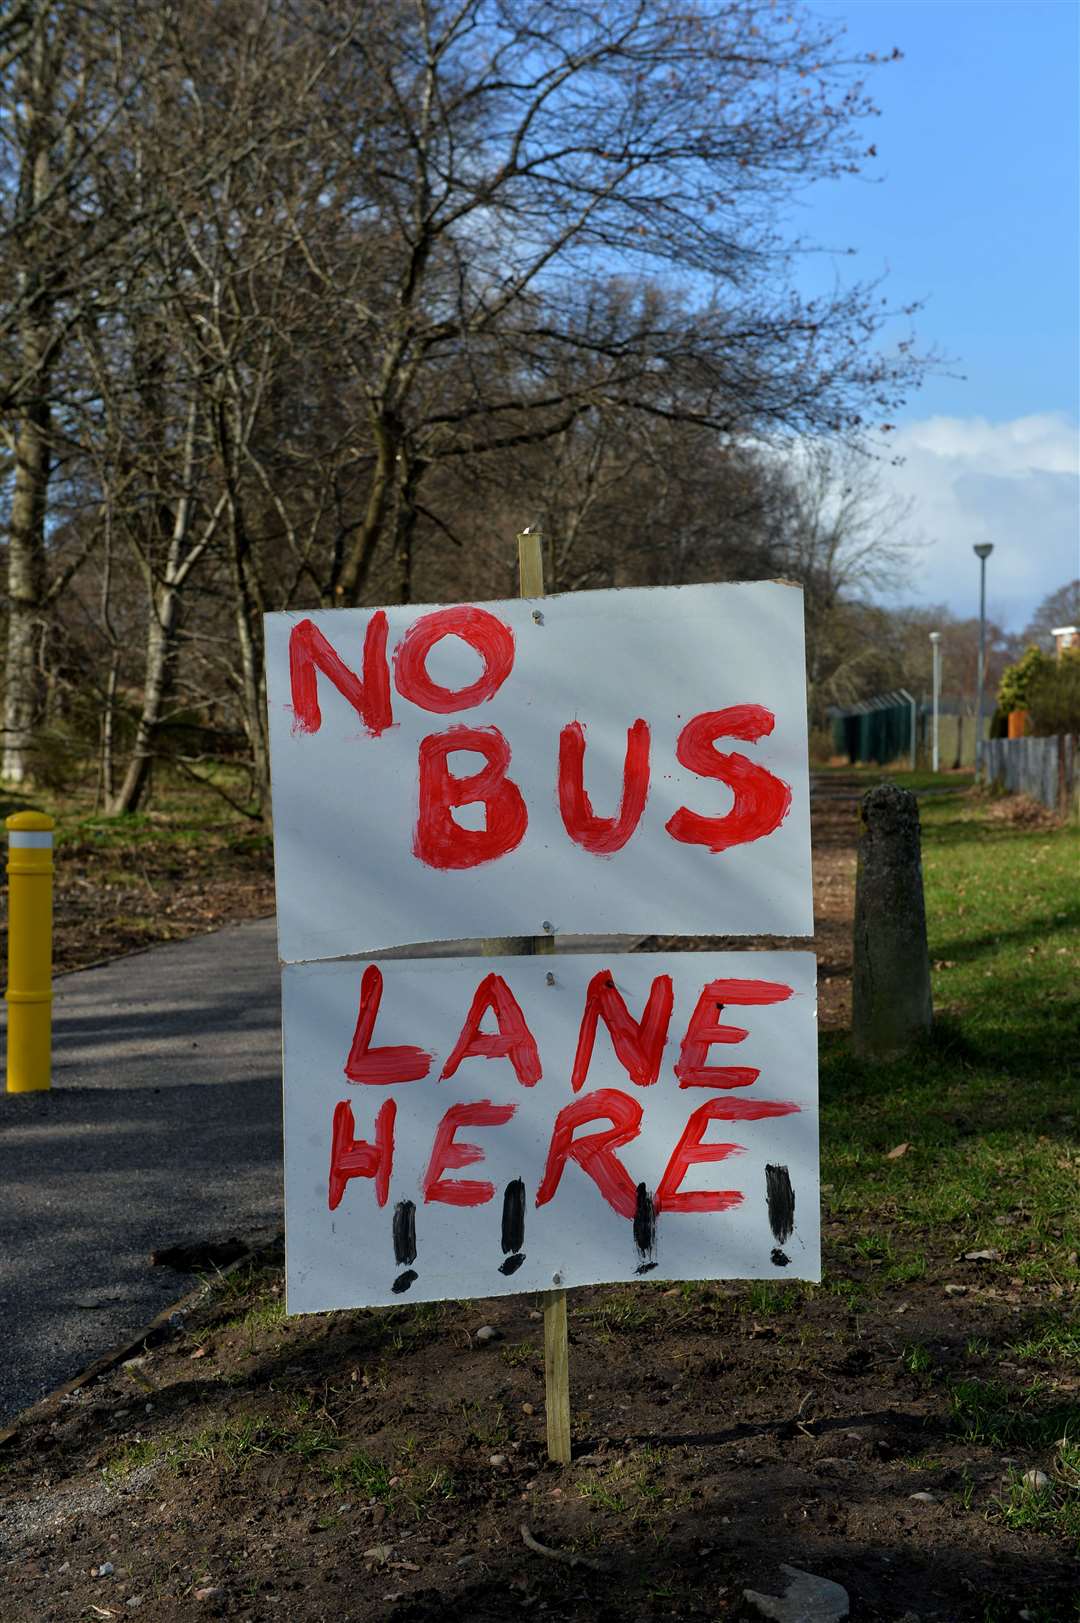 Plans for a bus gate between Raigmore estate and the hospital prompted an outcry.